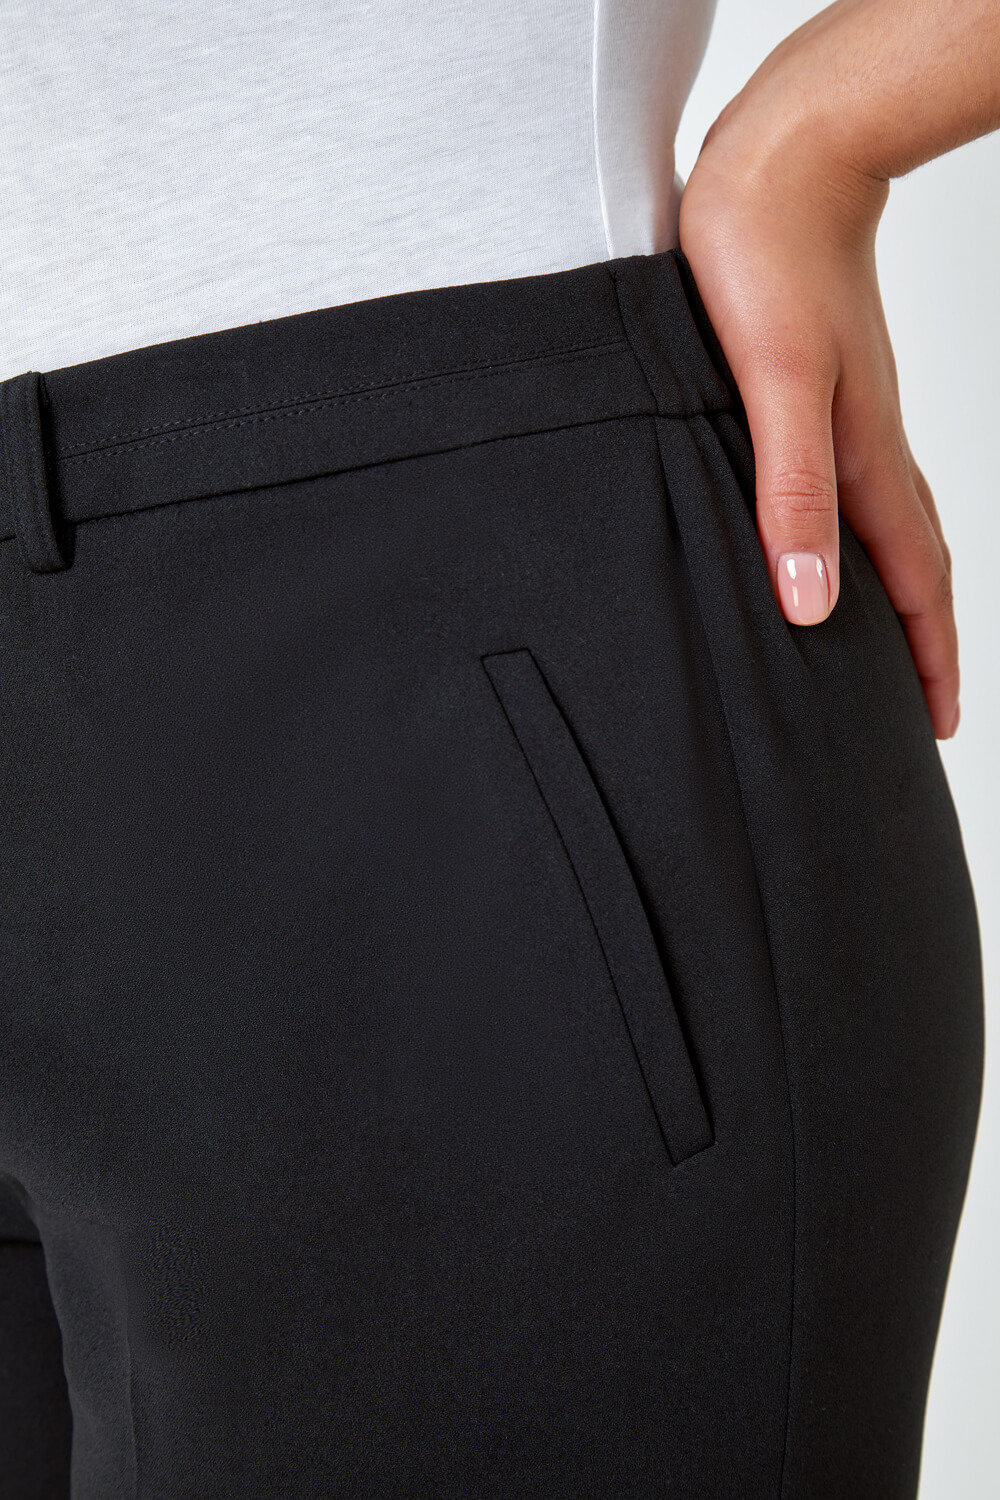 Black Curve Straight Smart Trousers, Image 5 of 6